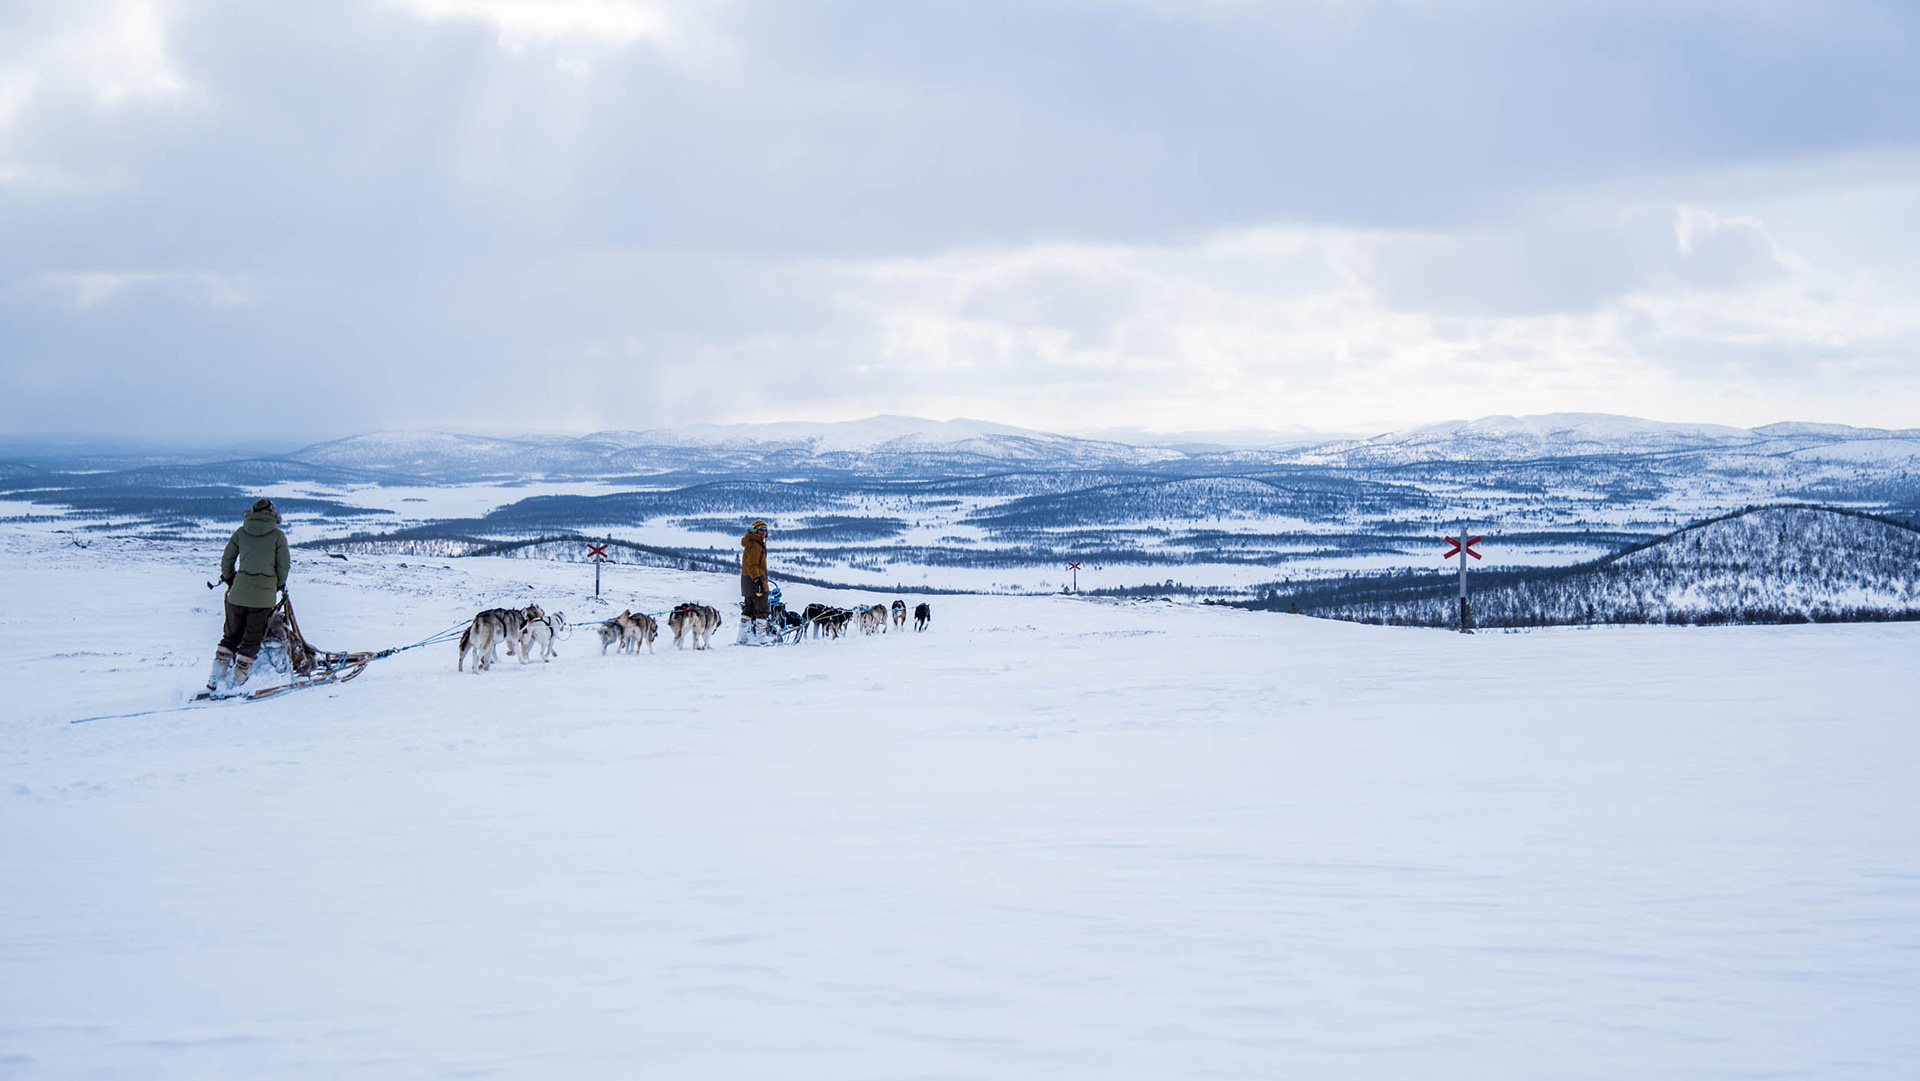 Taking husky dogs for a ride across the open snow; just one of the ways of working in Finnish Lapland